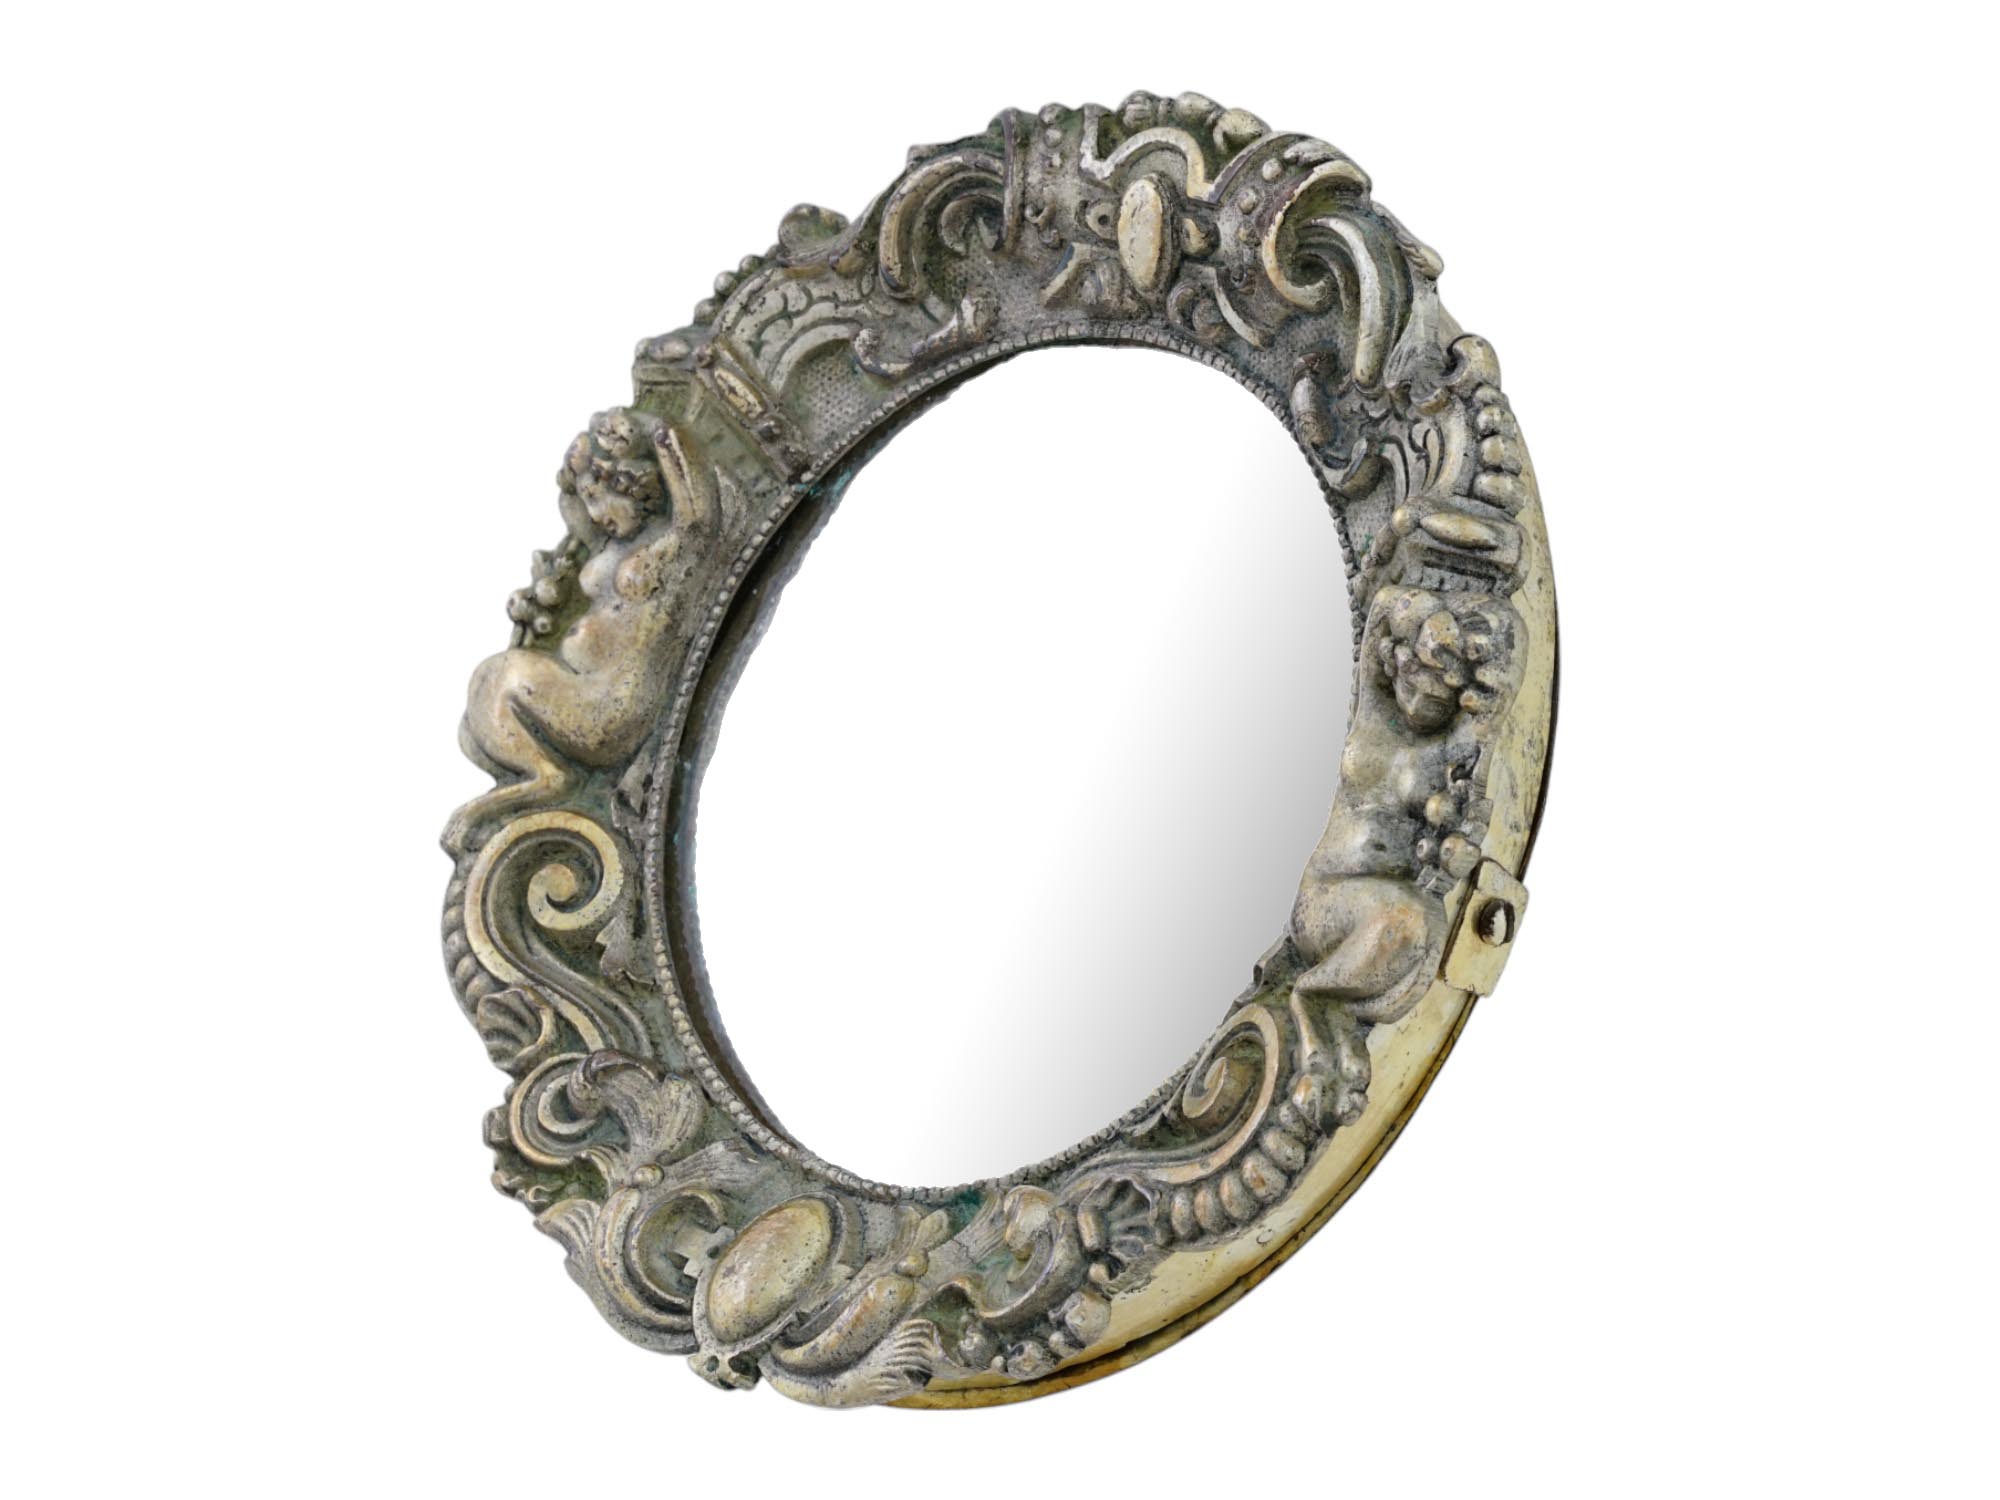 ANTIQUE BAROQUE ORNATE SILVERED BRONZE WALL MIRROR PIC-1